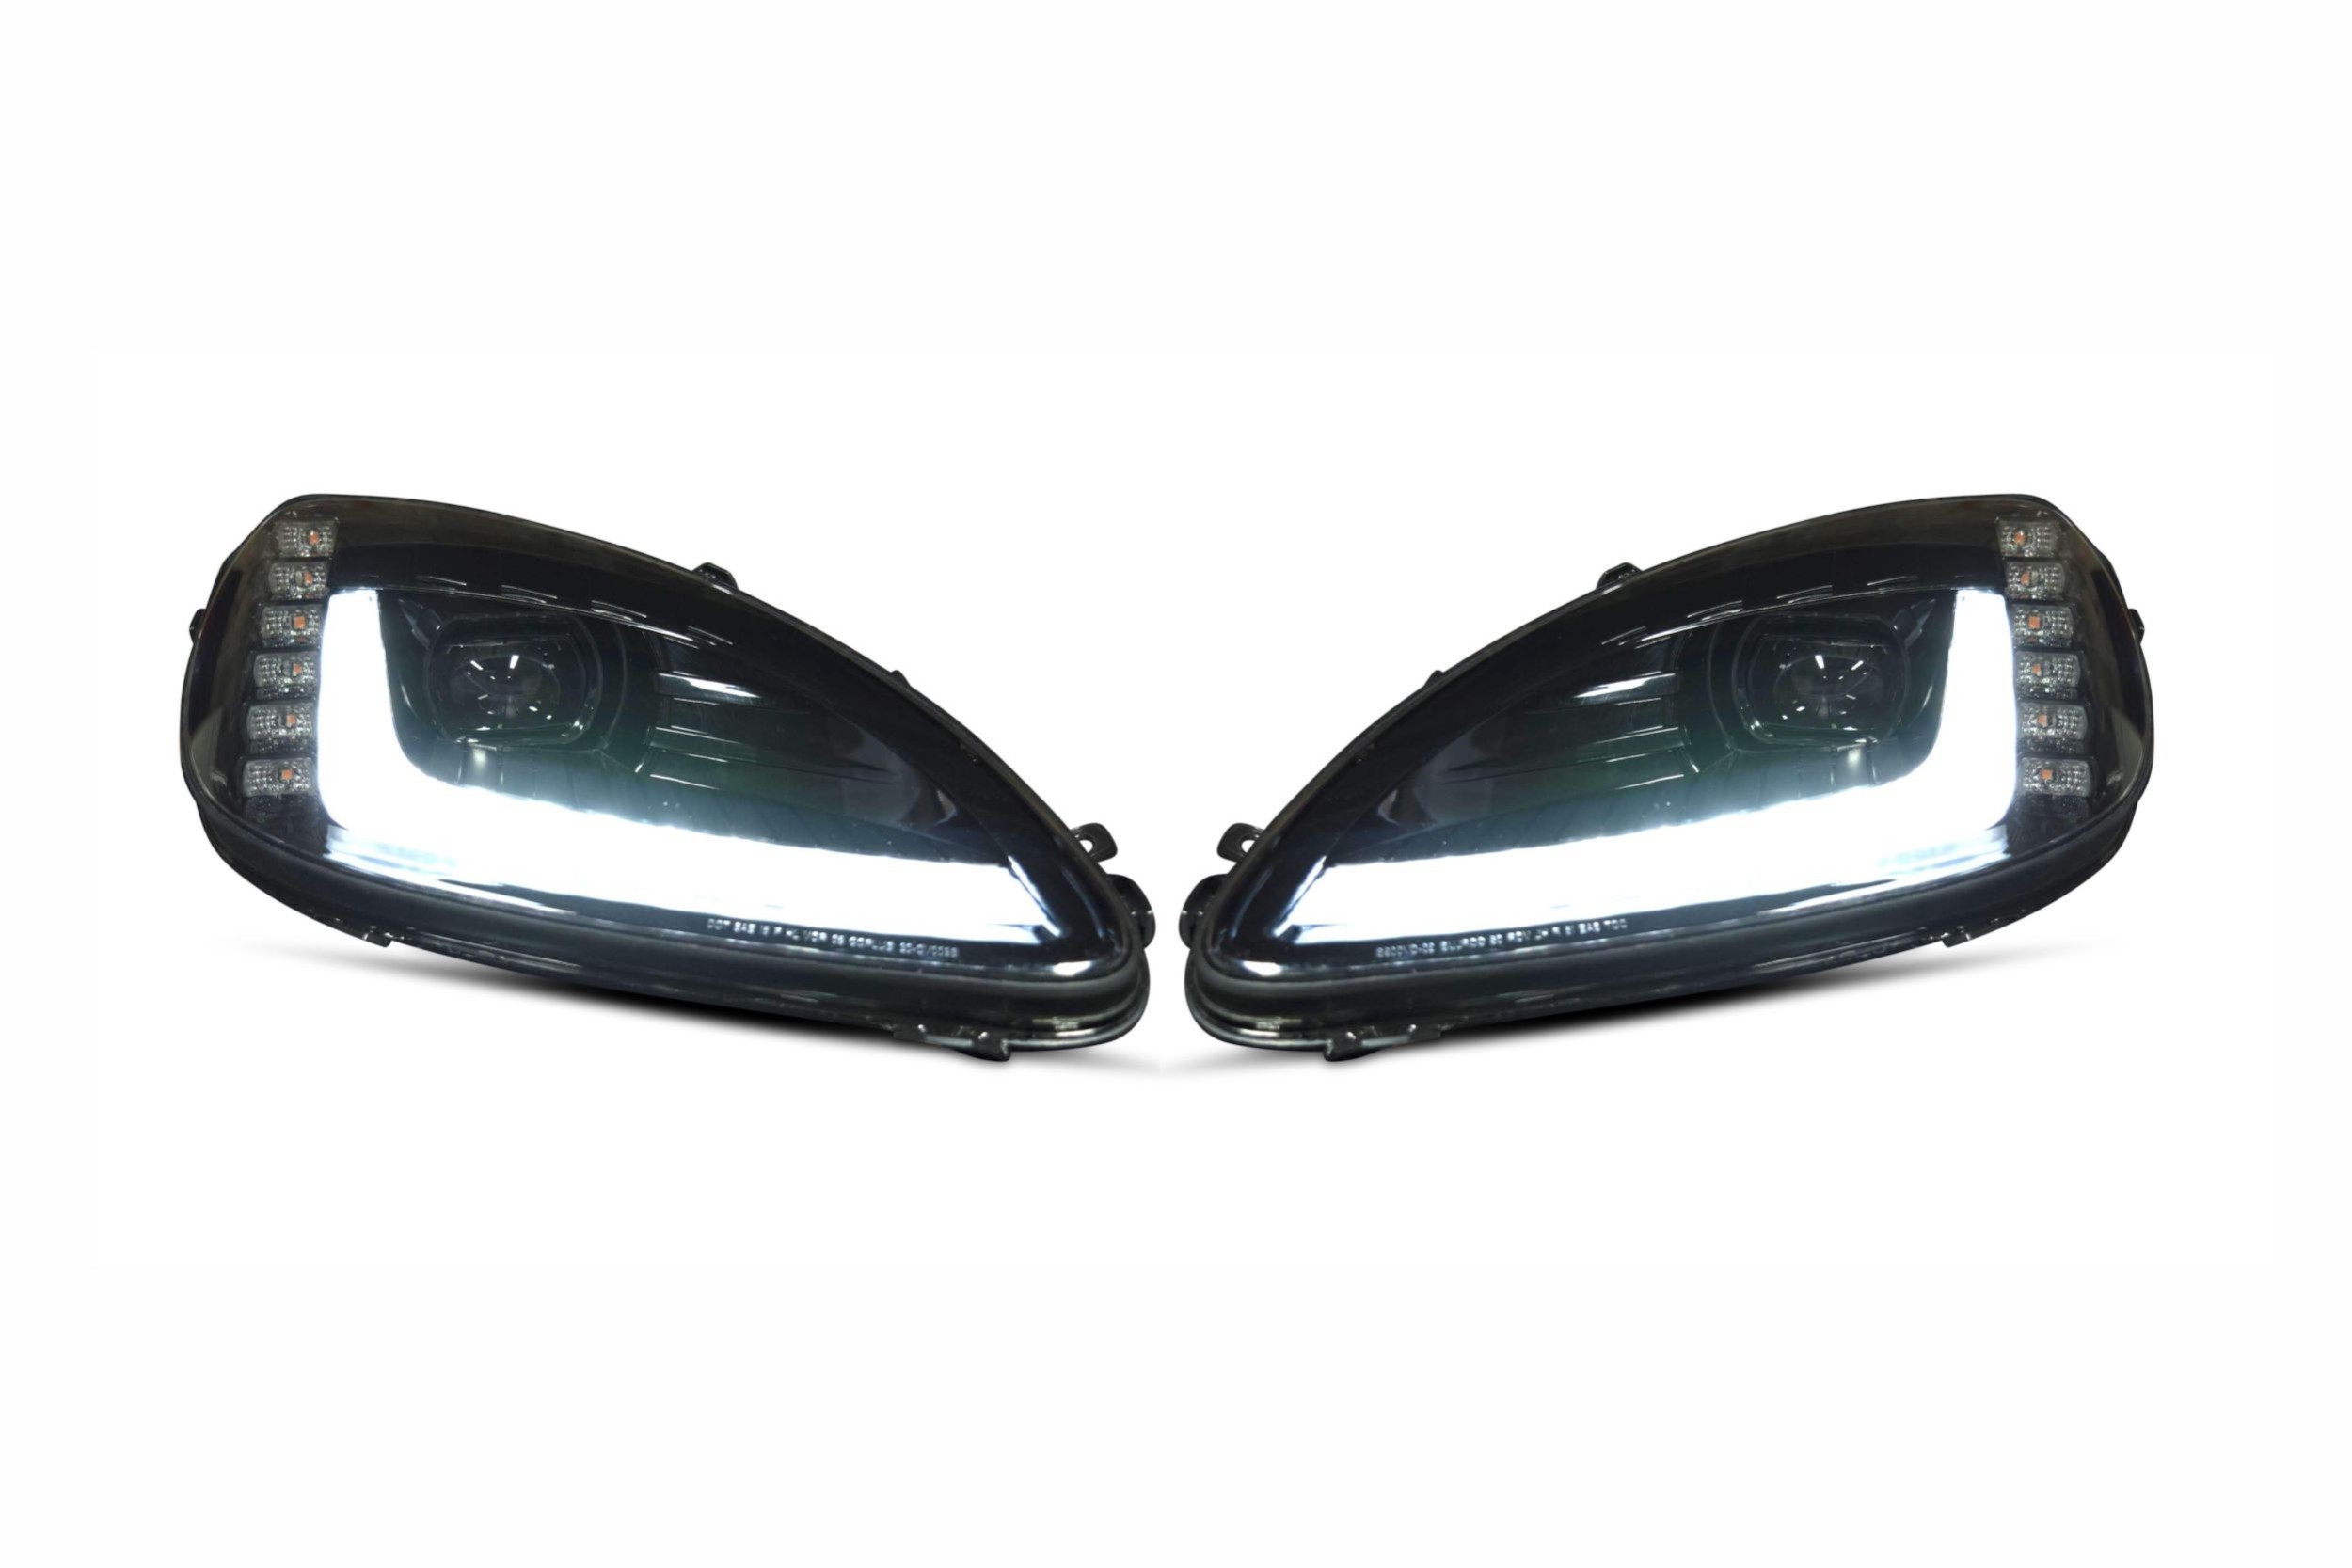 Pair For 2005-2013 C6 Corvette Headlight Headlamp Replacement Clear Cover Lens